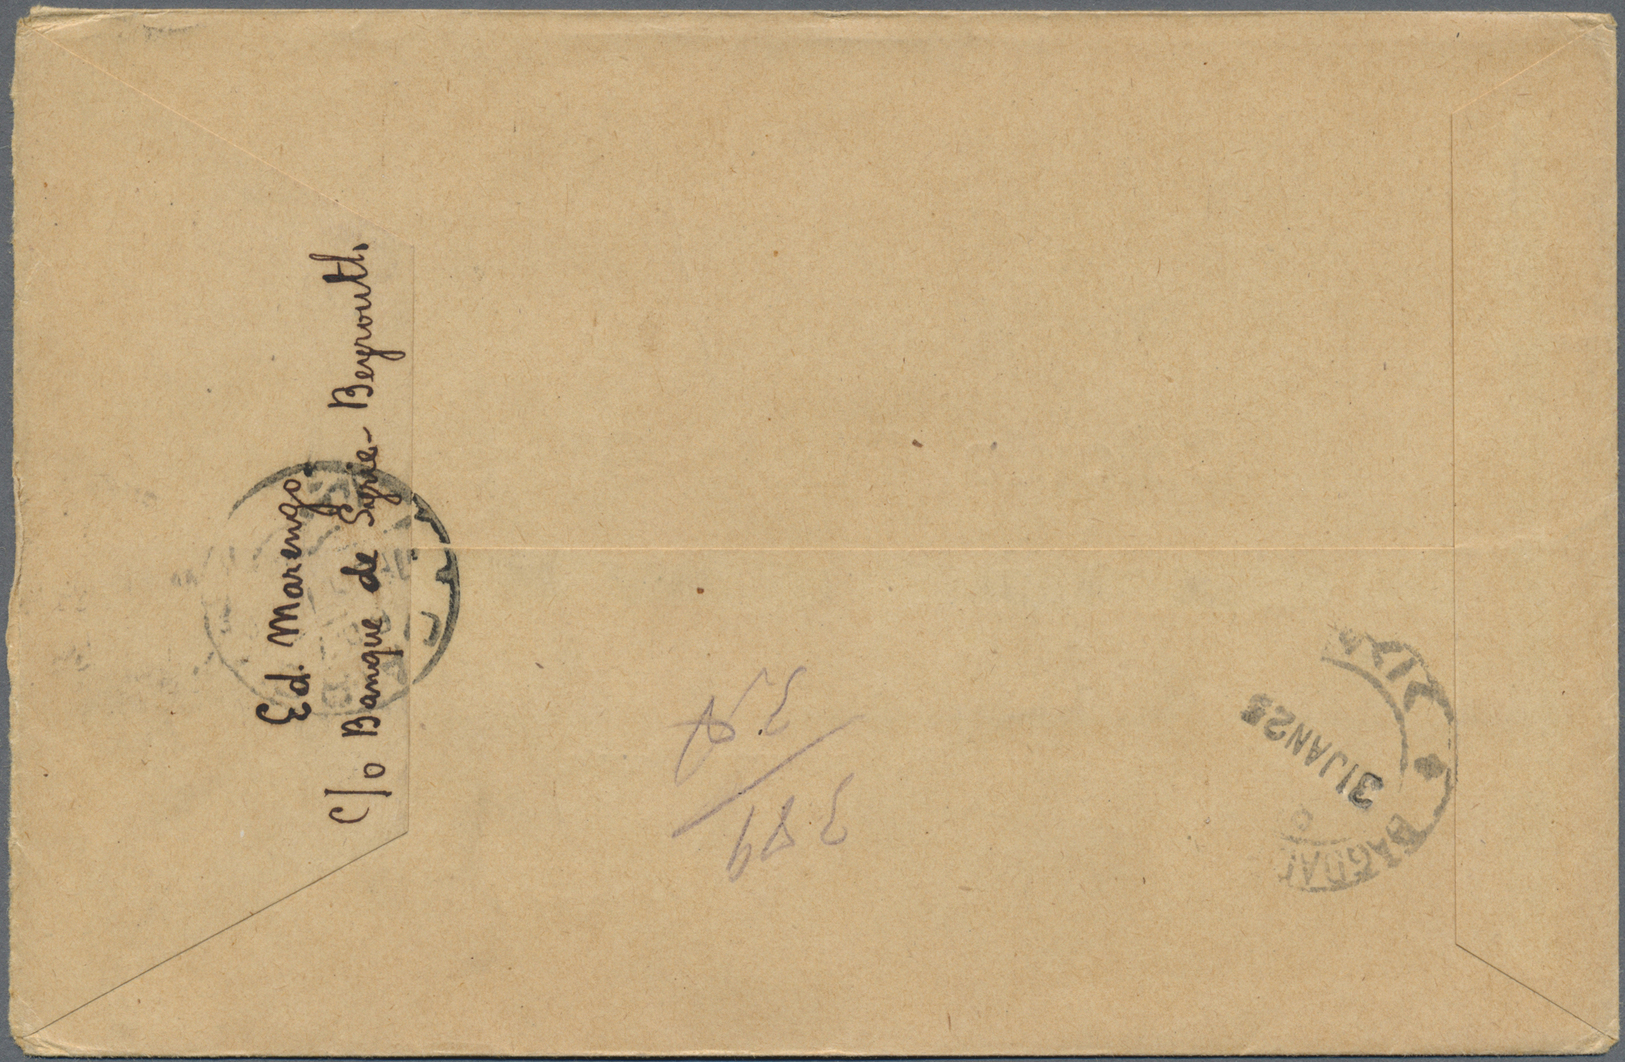 Br Libanon: 1925-29, Air Mail Cover "BEYROUTH - BAGHDAD - ALEXANDRIA 23/1/25" & First Flight Cover "BEYROUTH MARSEILLE 3 - Lebanon